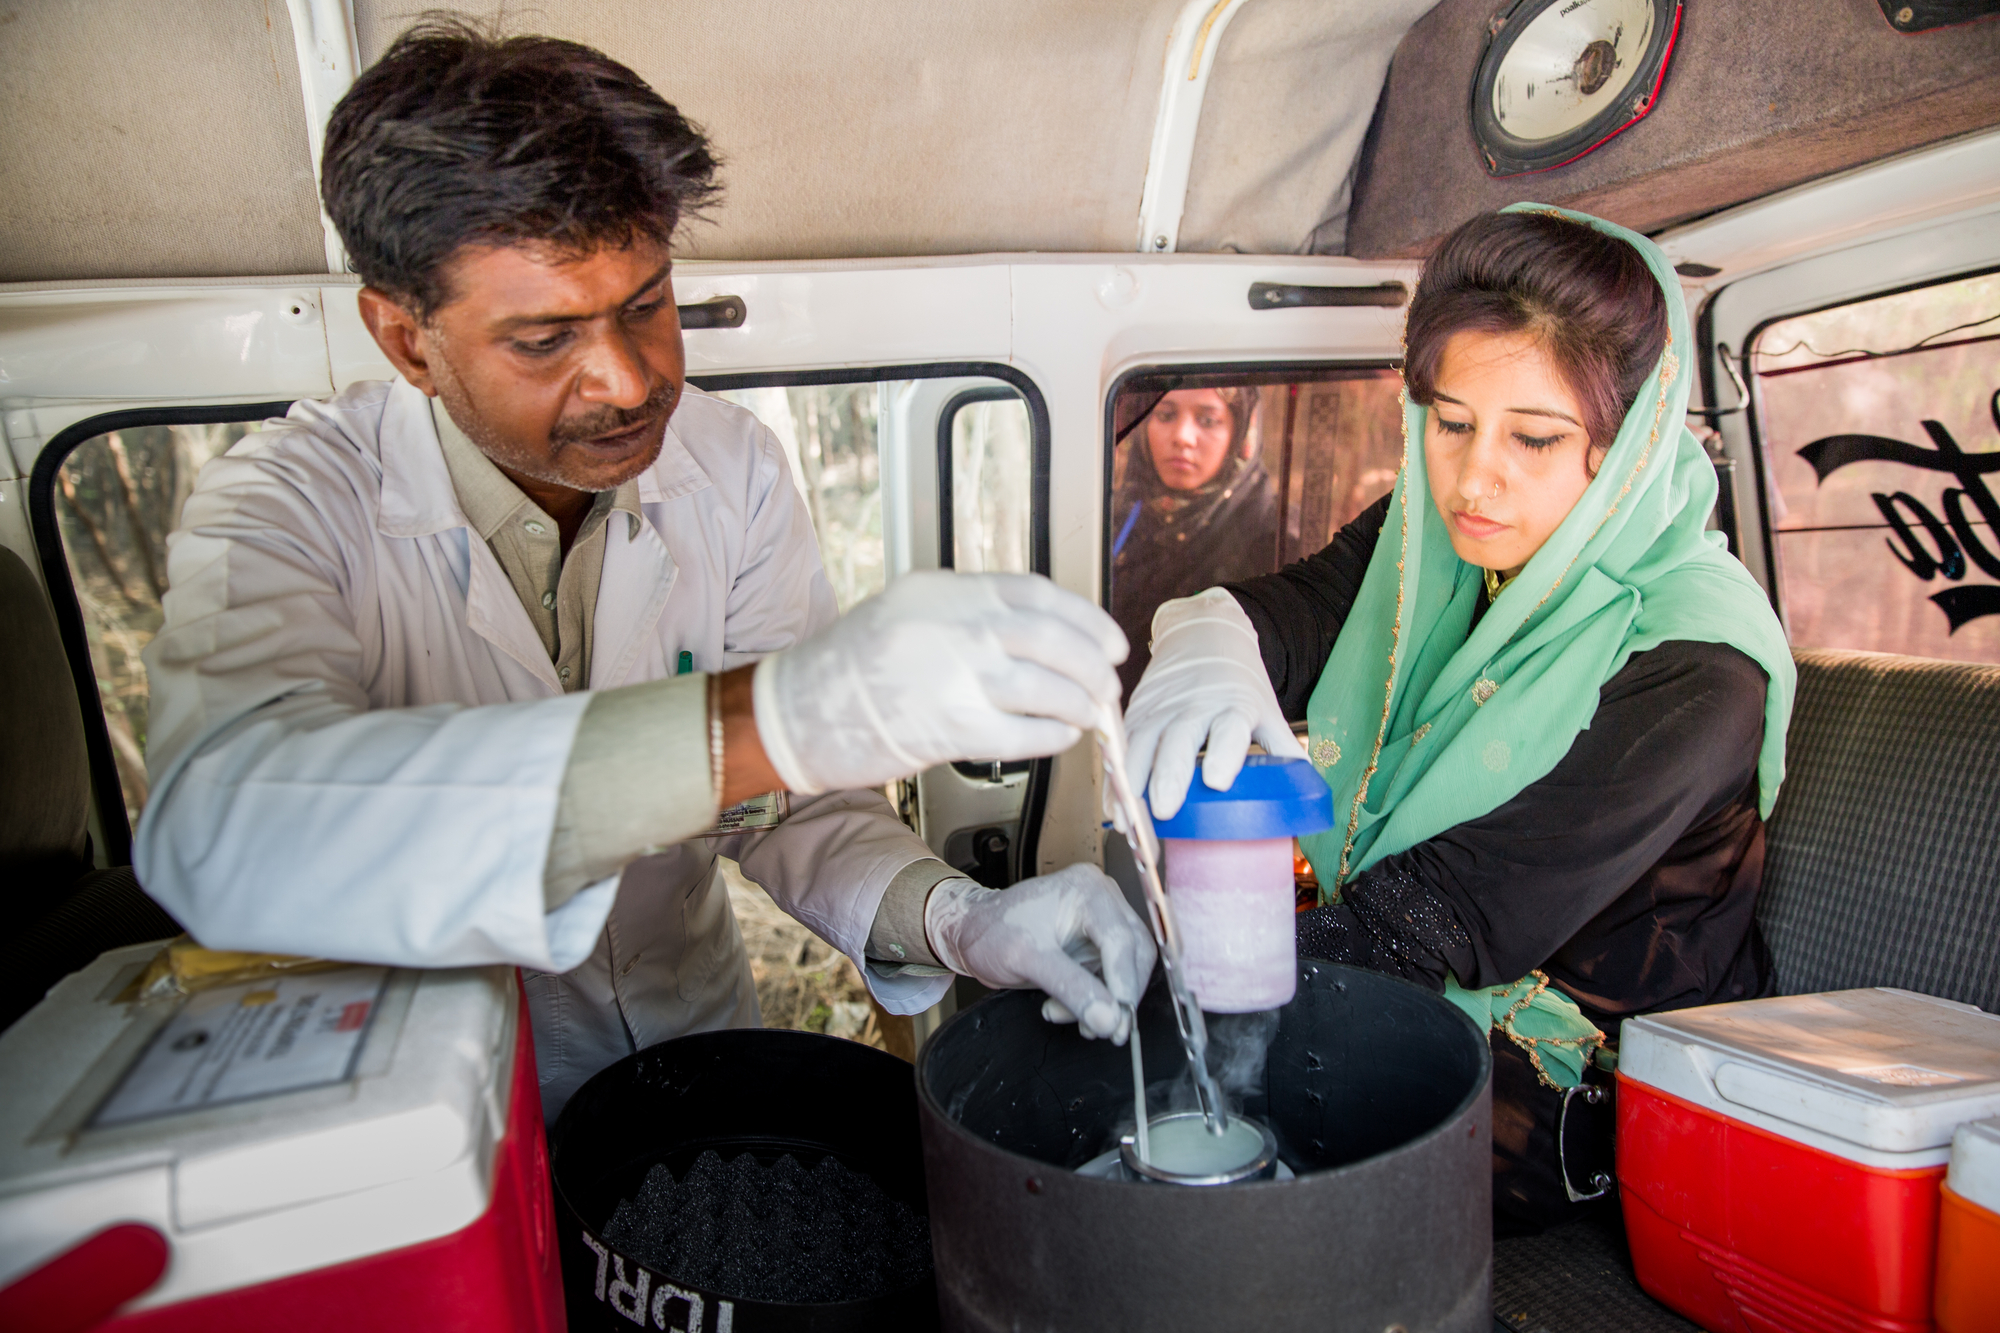 Mujeeb Hussain, and Tahira (right), research assistant, AKU (Aga Khan University) shifting stool sample of Pram Chand (6 month old) in a special storage container in the car before going to office from Akhand Jo Khoh village, Matiari district, Sindh province, Pakistan on December 1, 2016.